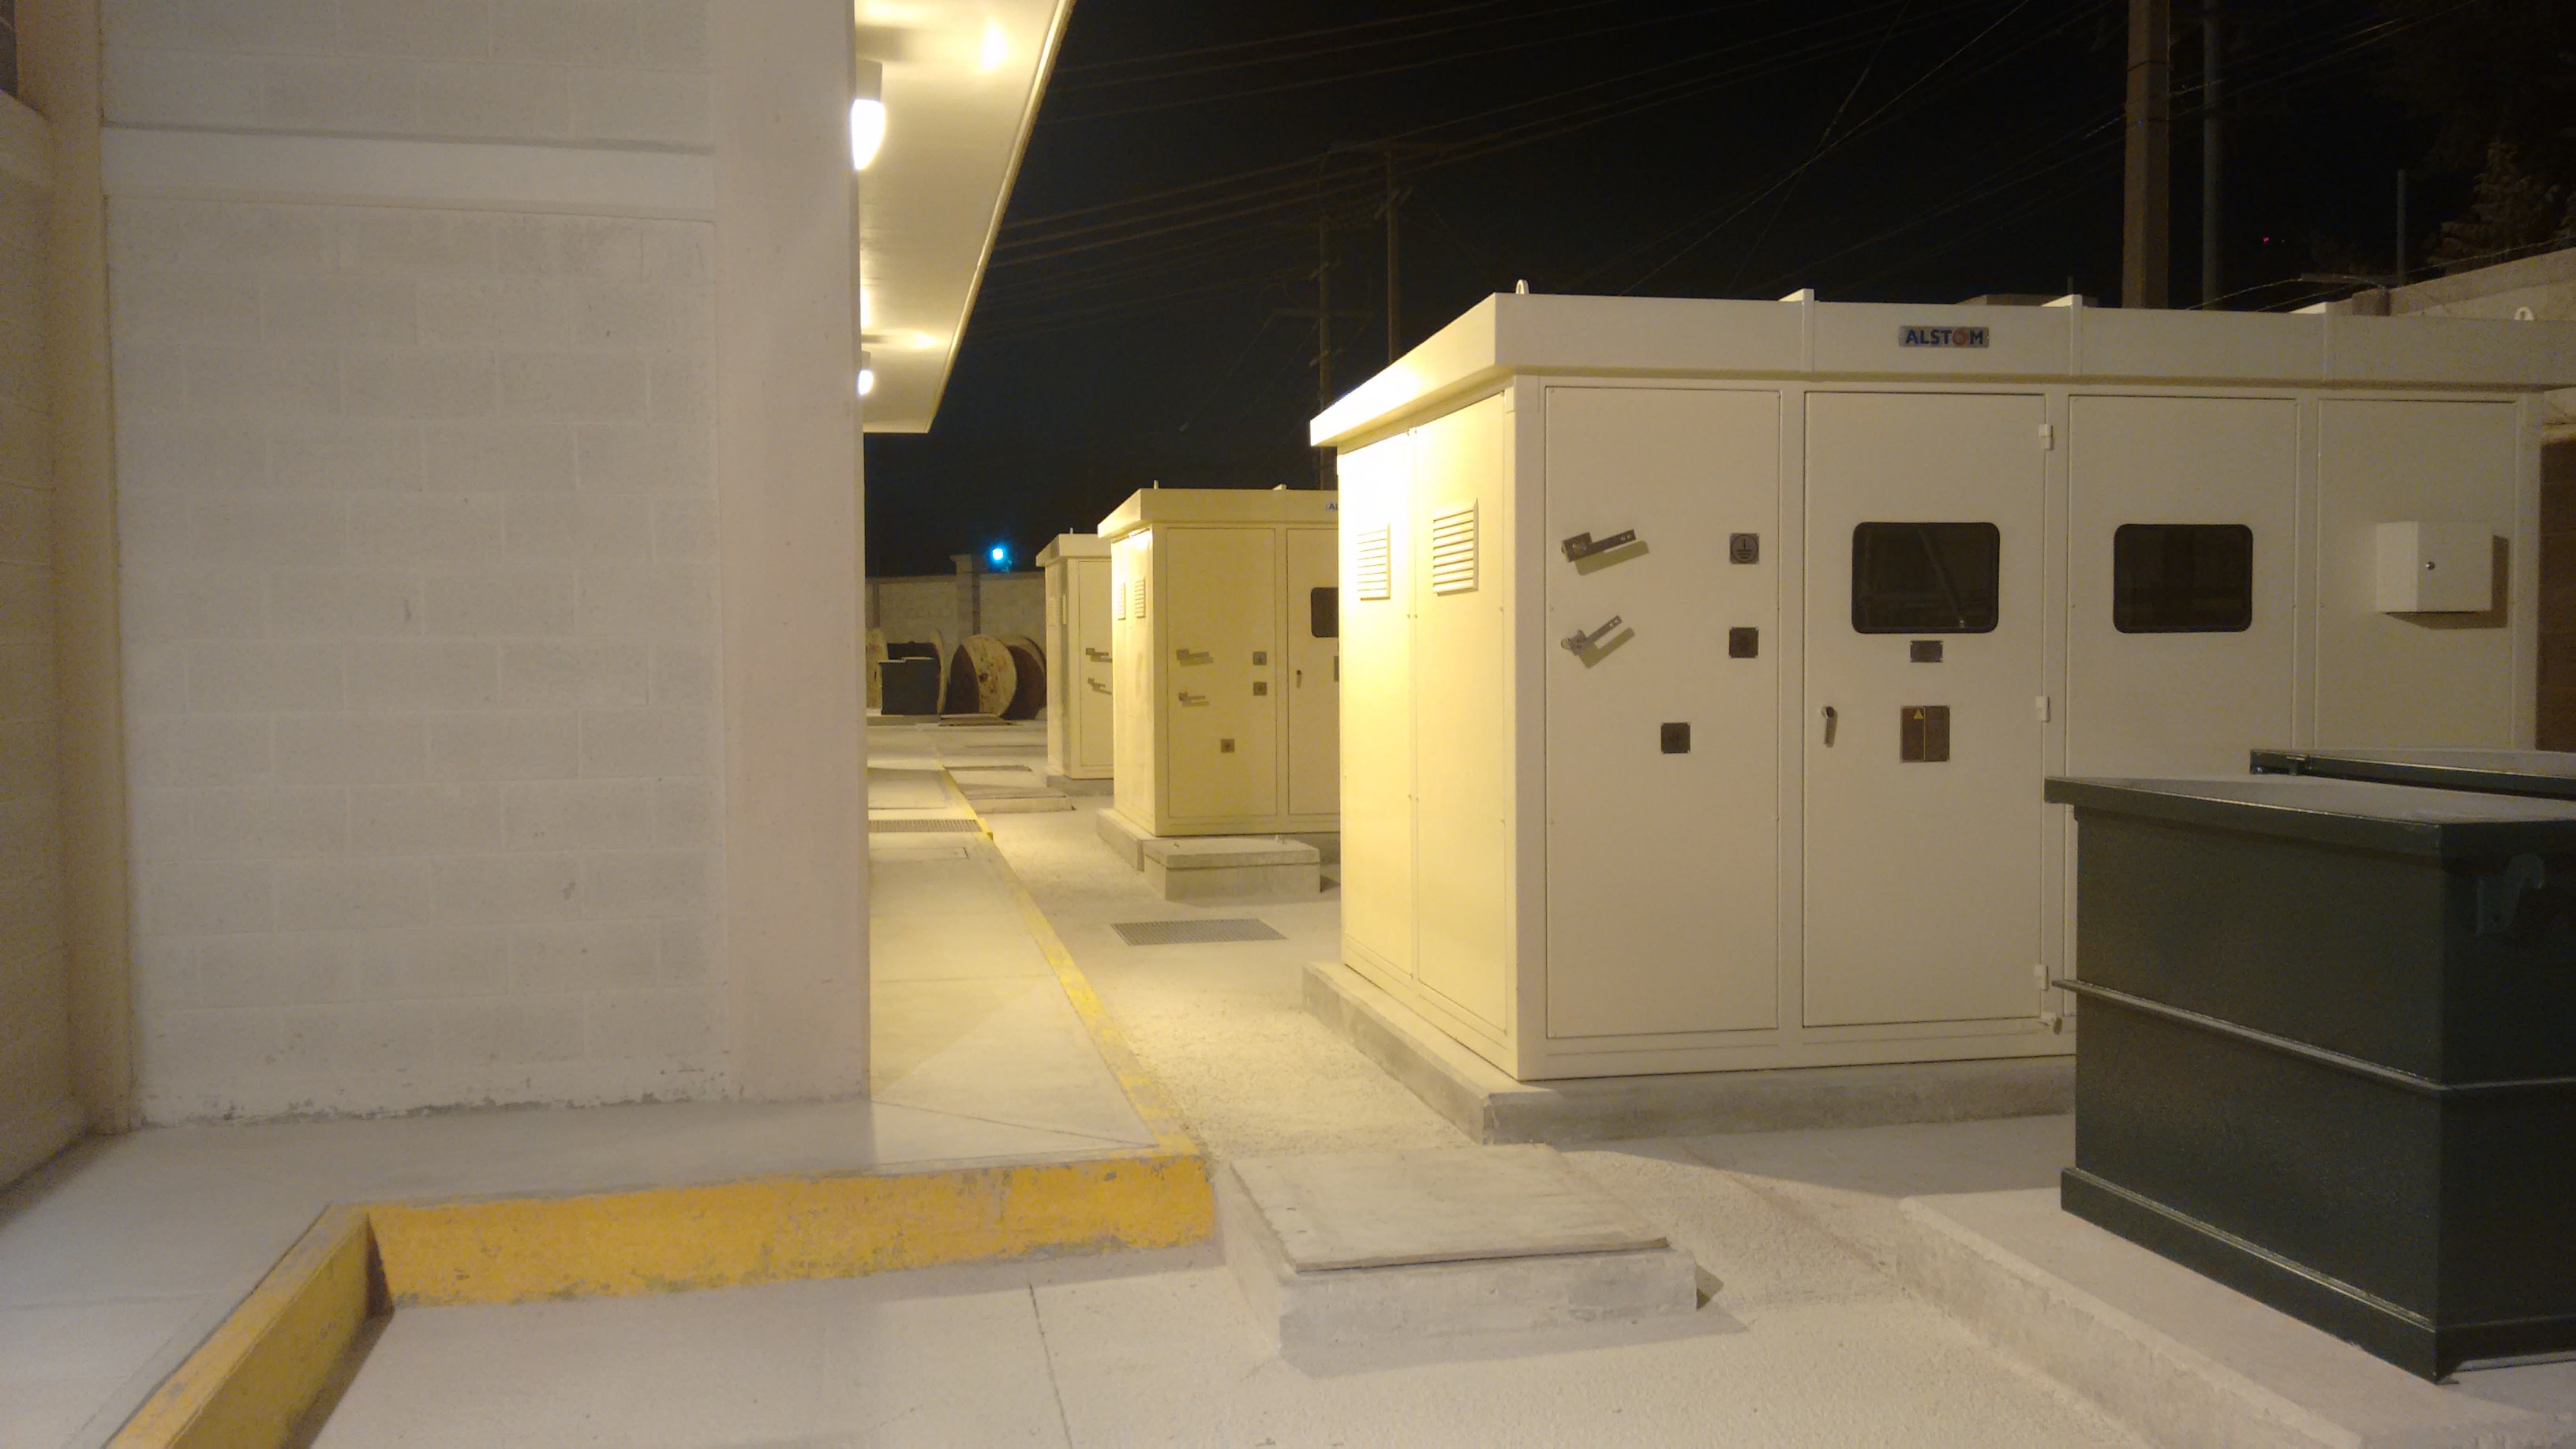 Campeche electrical substation